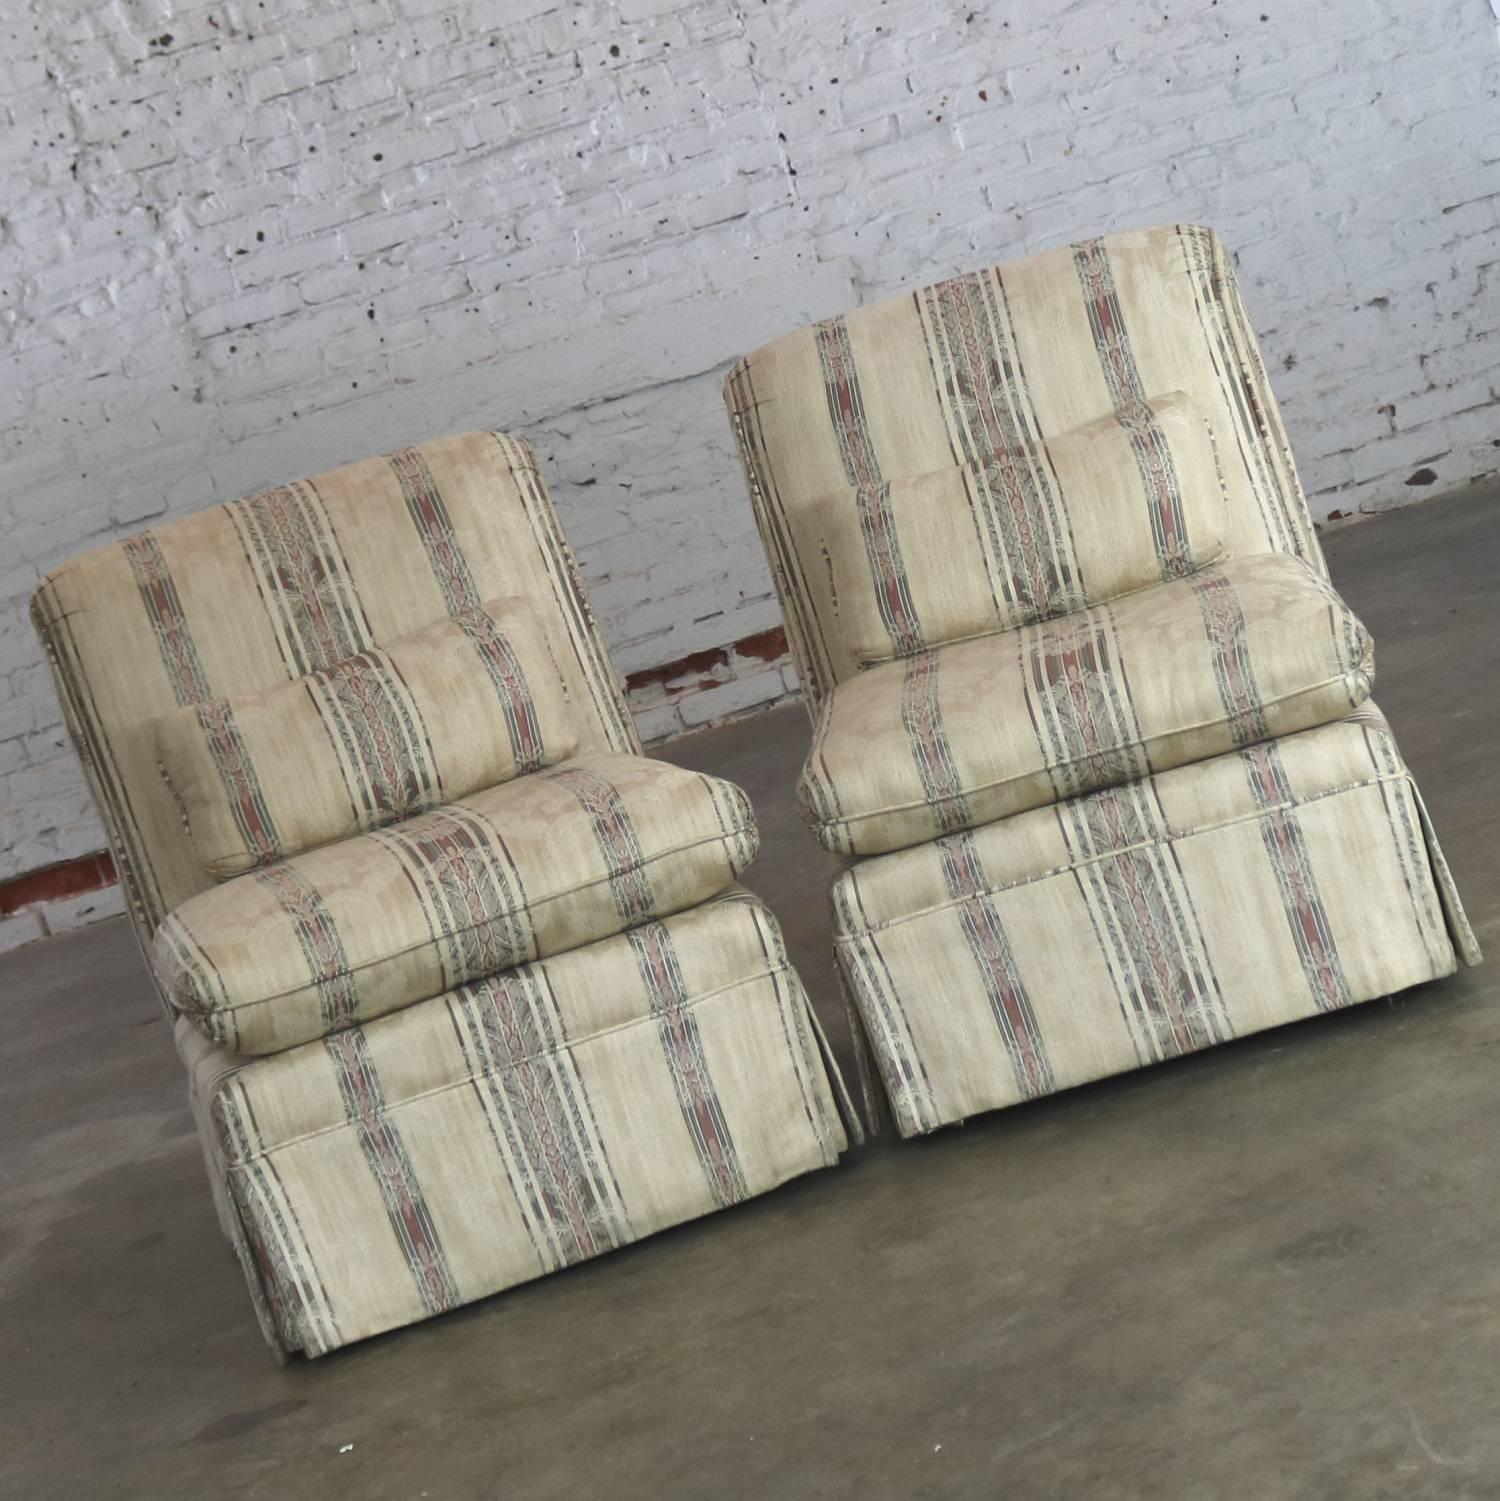 Handsome pair of vintage slipper chairs with roll back and Classic striped fabric. In wonderful condition circa 1980s.

Sometimes you just need a Classic. Enter this pair of roll back slipper chairs. Simple Classic design with flair. This pair of